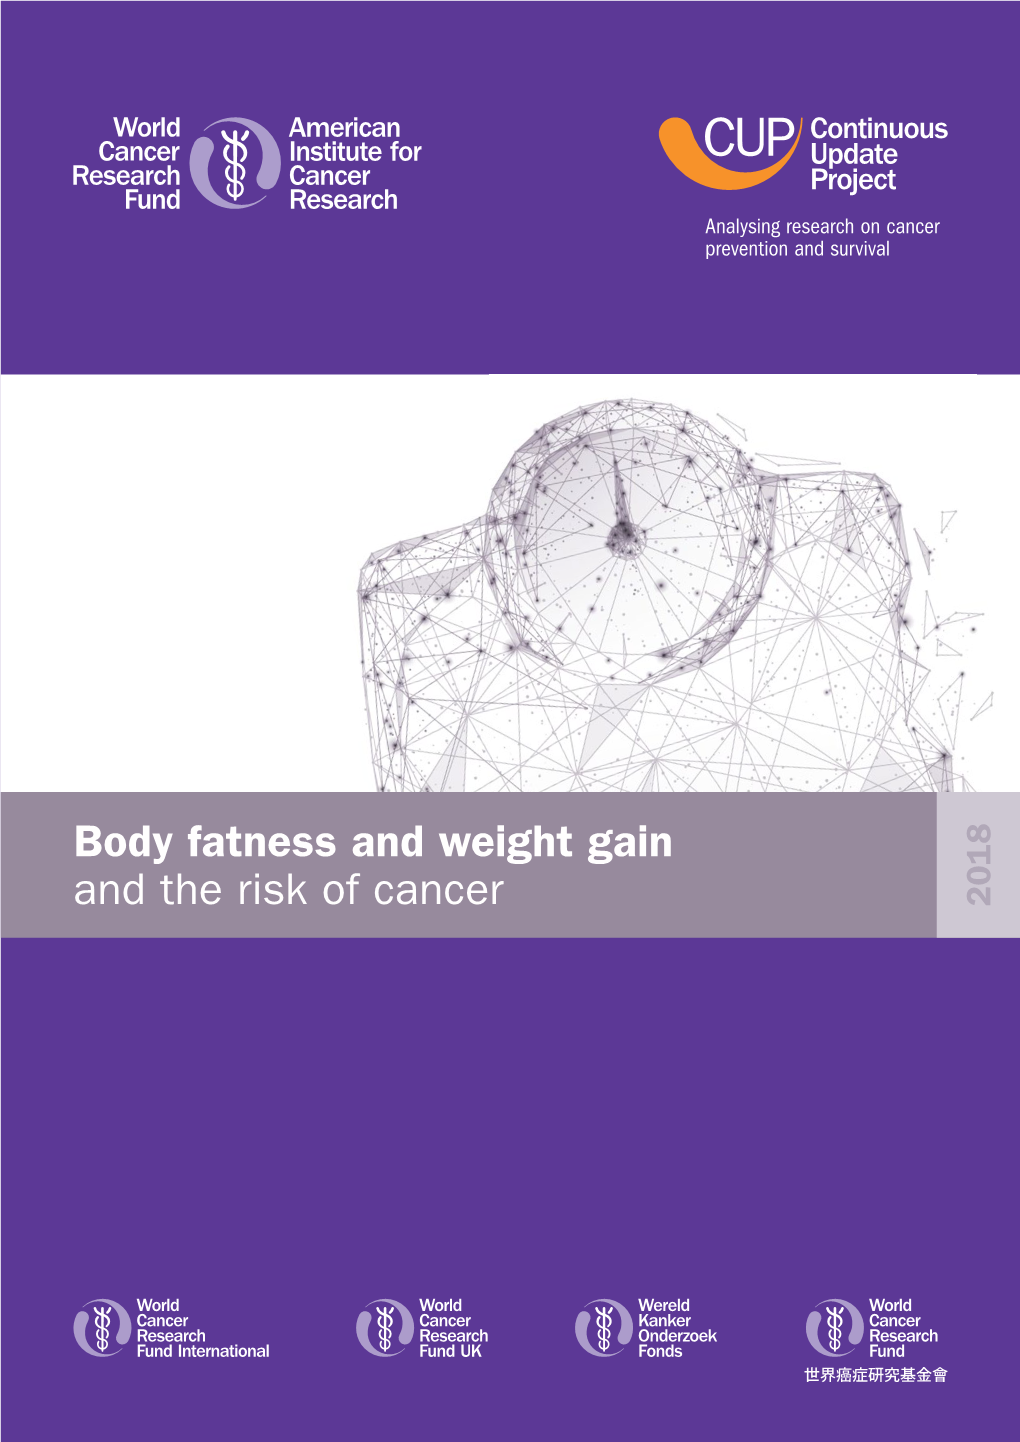 Body Fatness and Weight Gain and the Risk of Cancer: a Summary Matrix 7 2